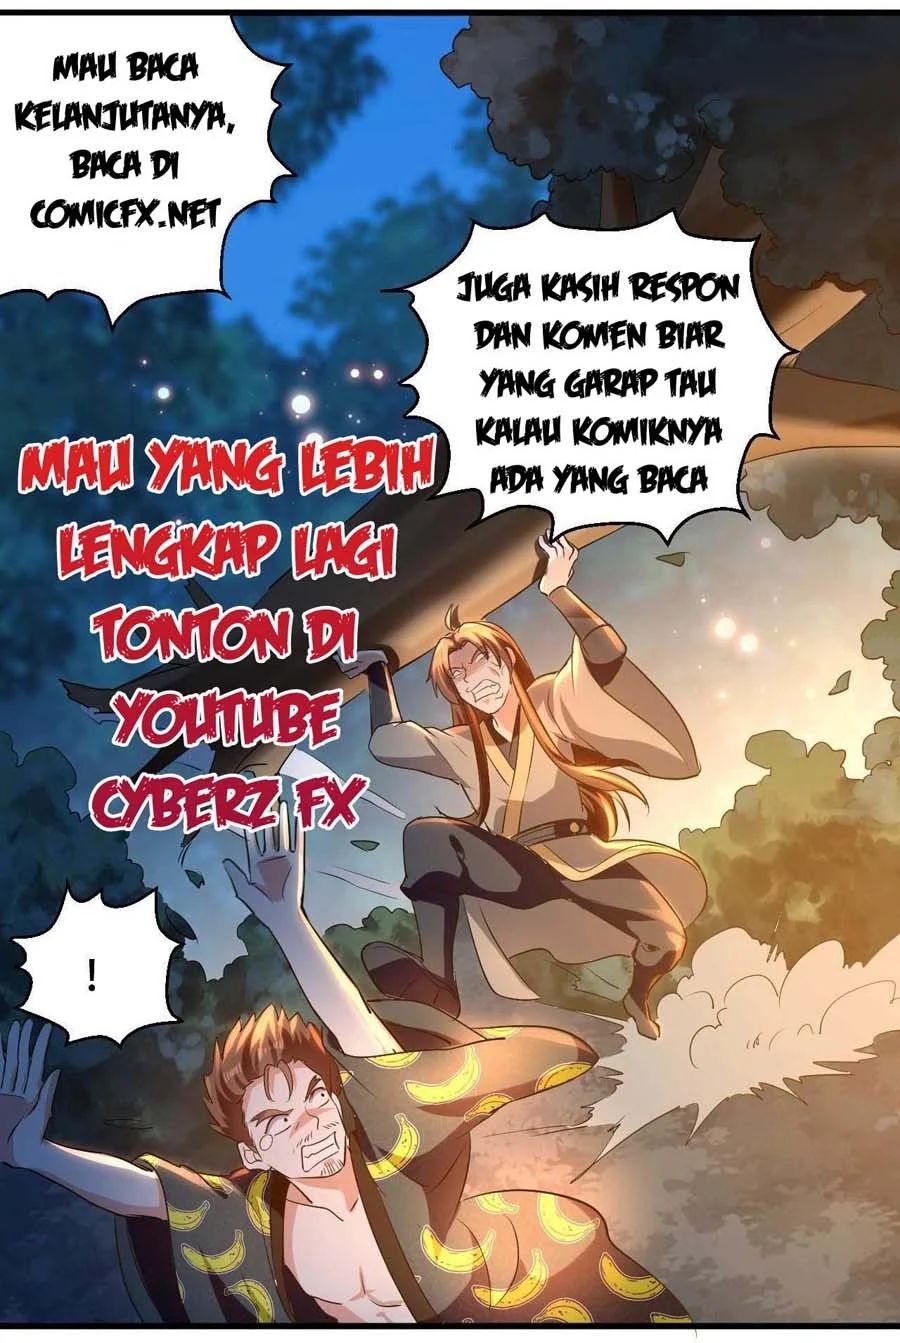 The Nine Heaven Of Martial Arts Chapter 128